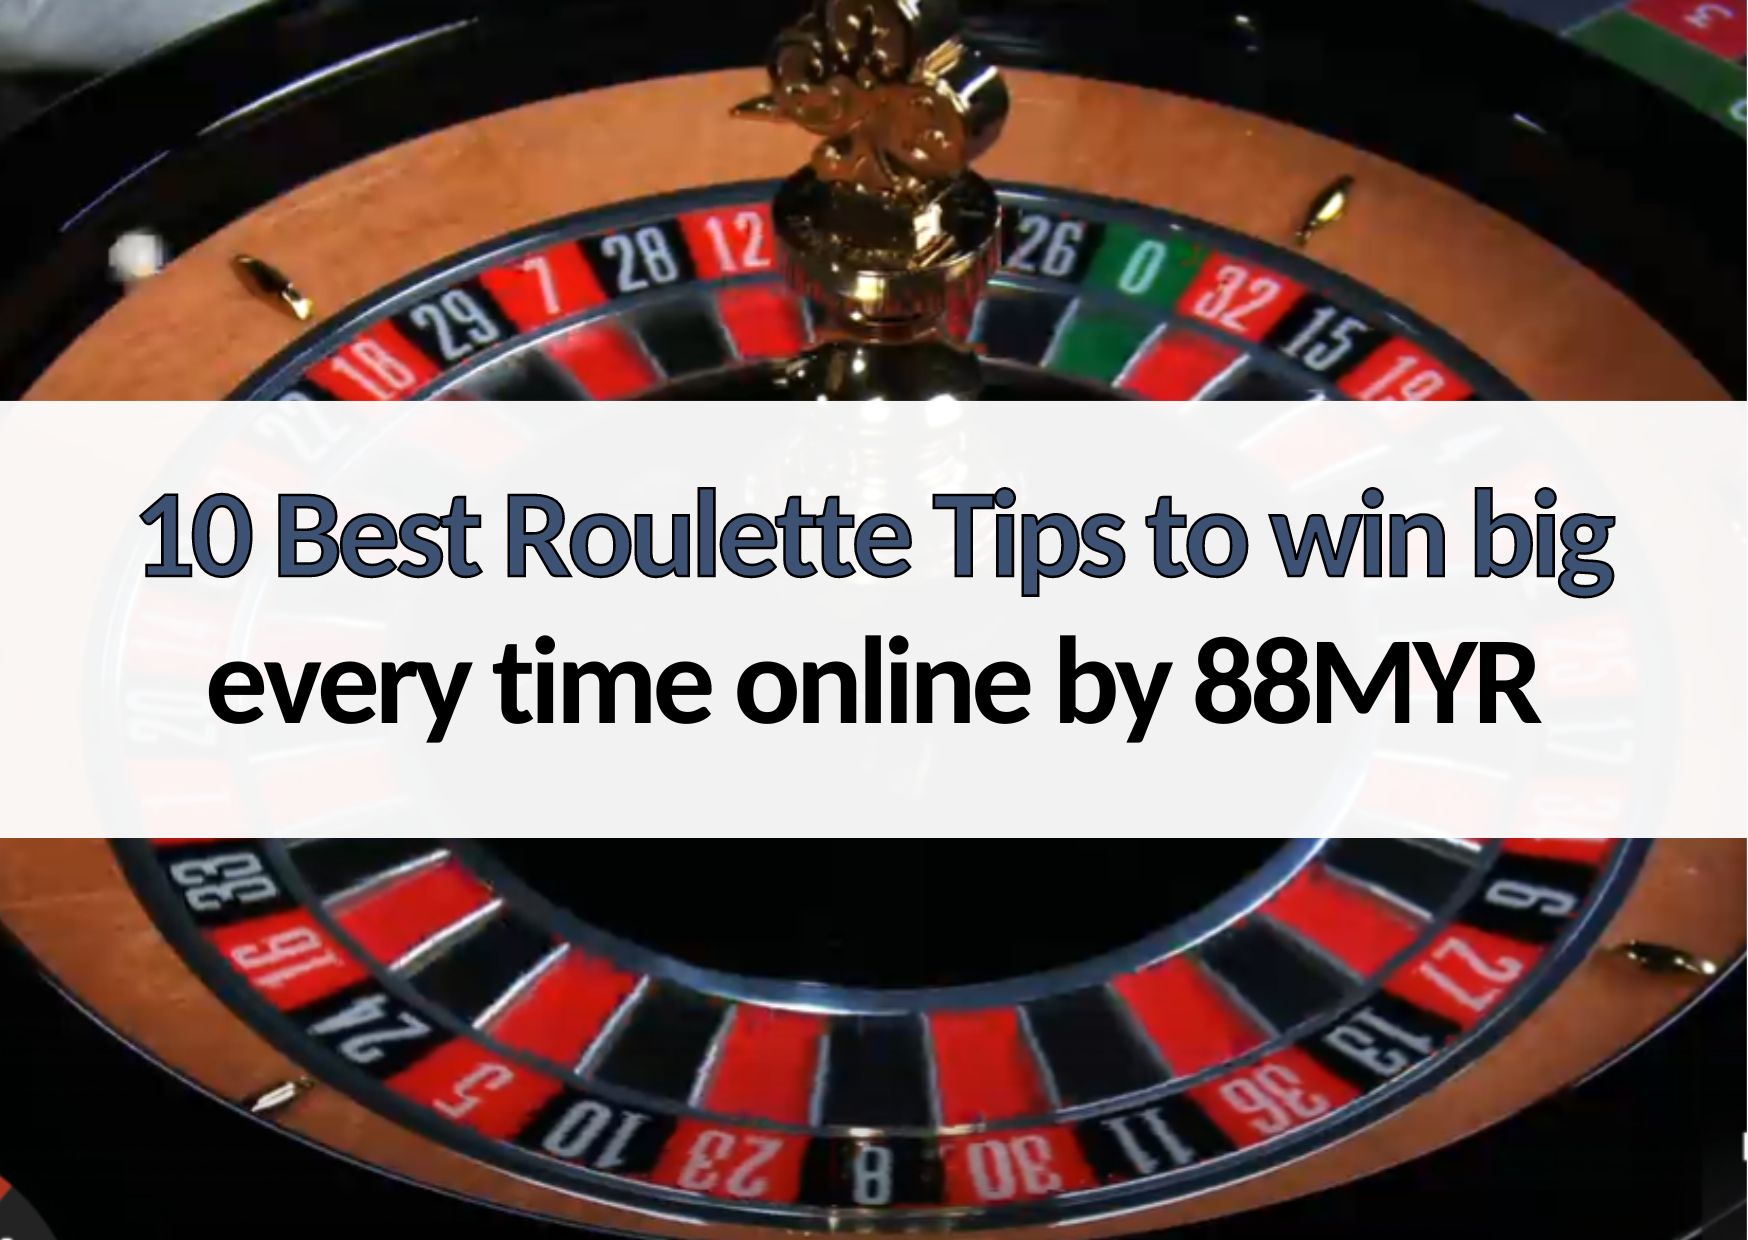 10 best roulette tips to win big